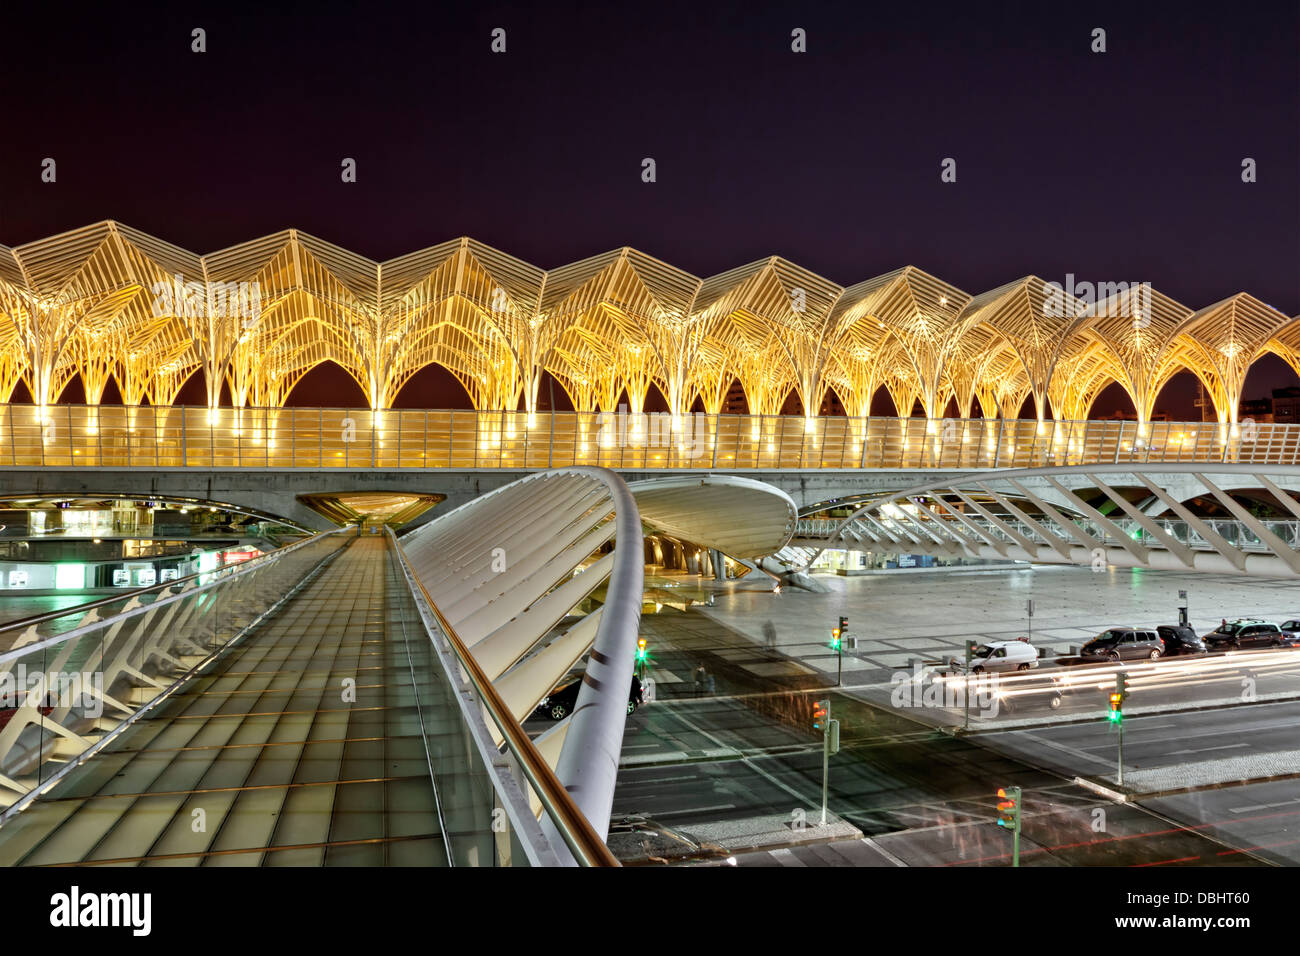 Oriente railway station at Lisbon, built by Santiago Calatrava, at night. View from the skywalk to the shopping mall. Stock Photo